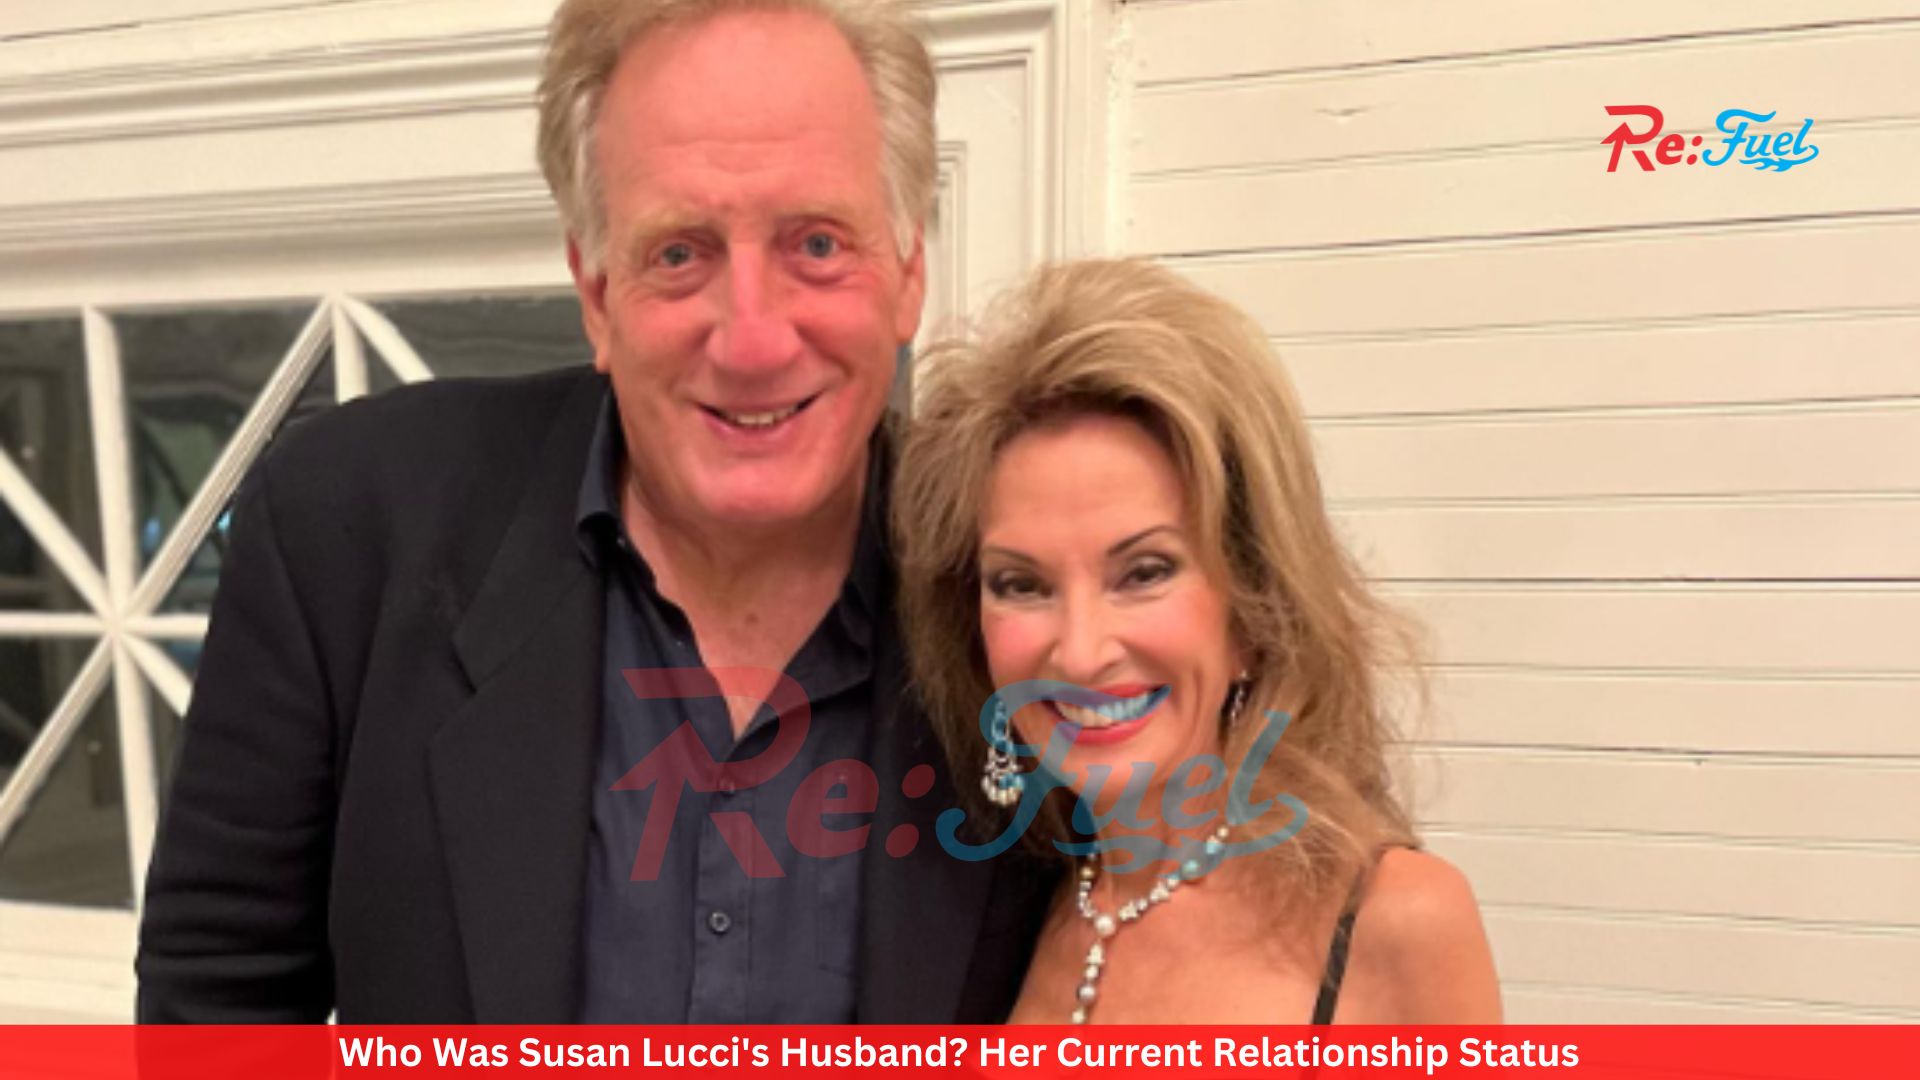 Who Was Susan Lucci's Husband? Her Current Relationship Status